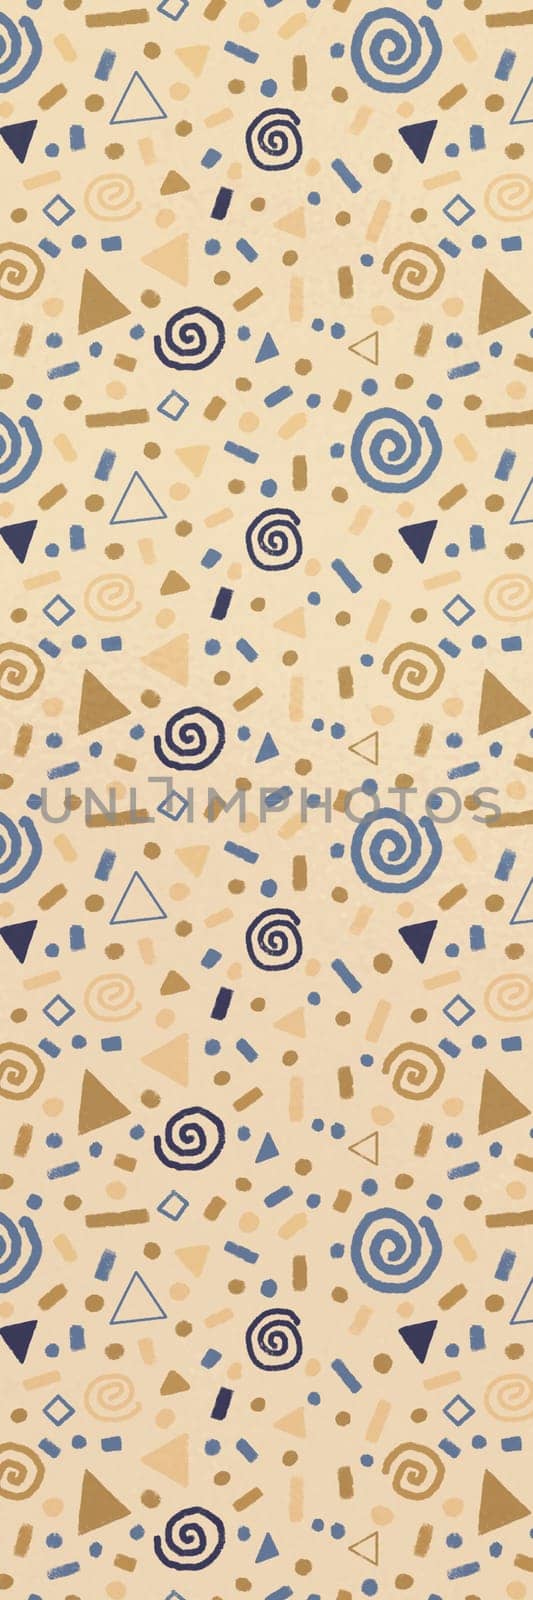 Bookmark with festive pattern with gold and blue doodles, swirls, stars, geometric elements